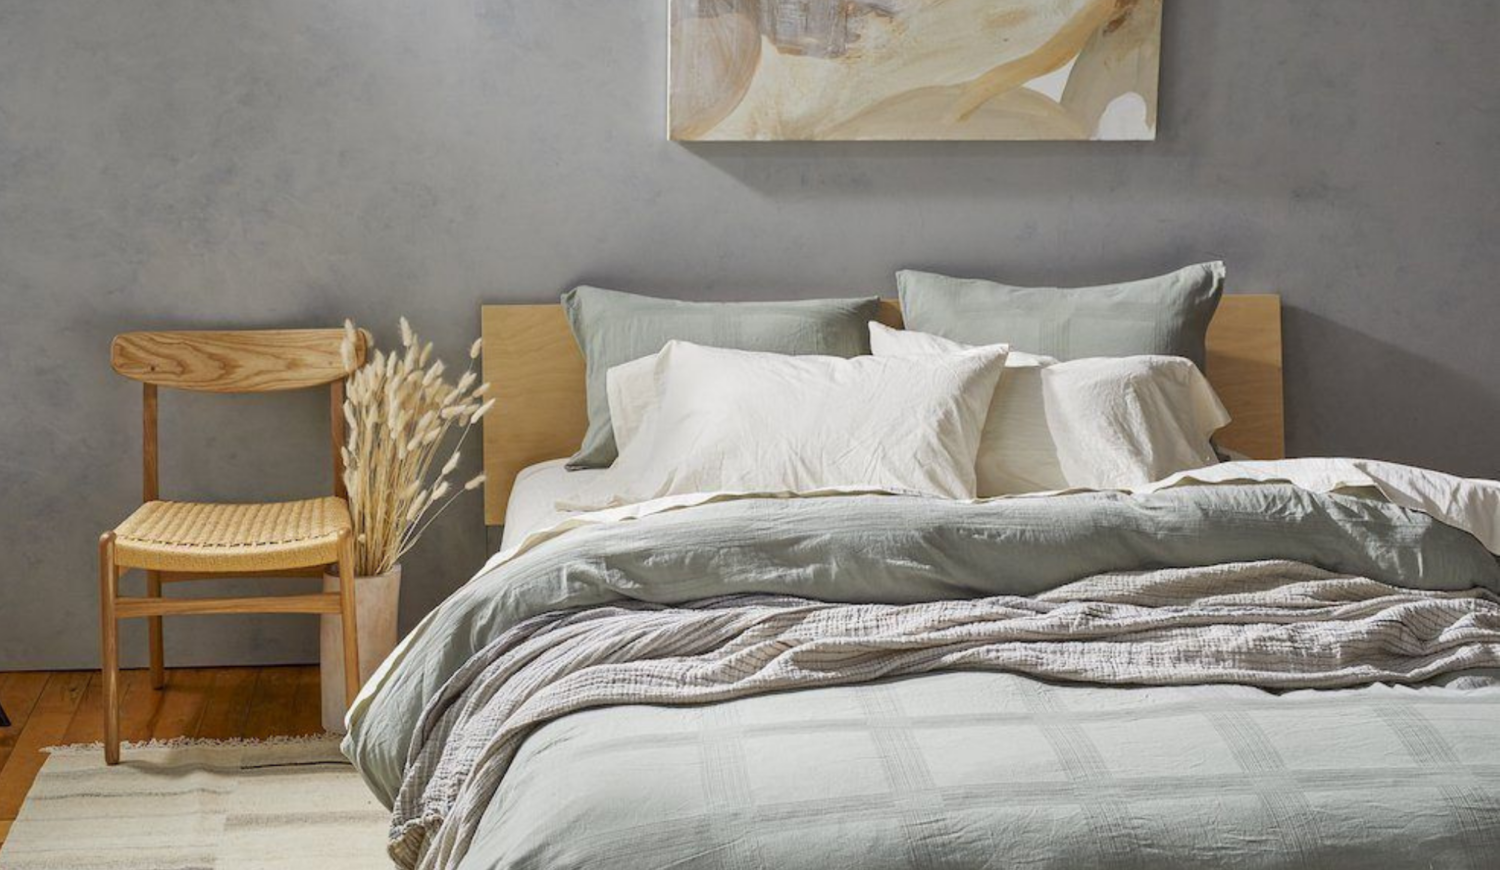 Guide to Natural Healthy Bedding